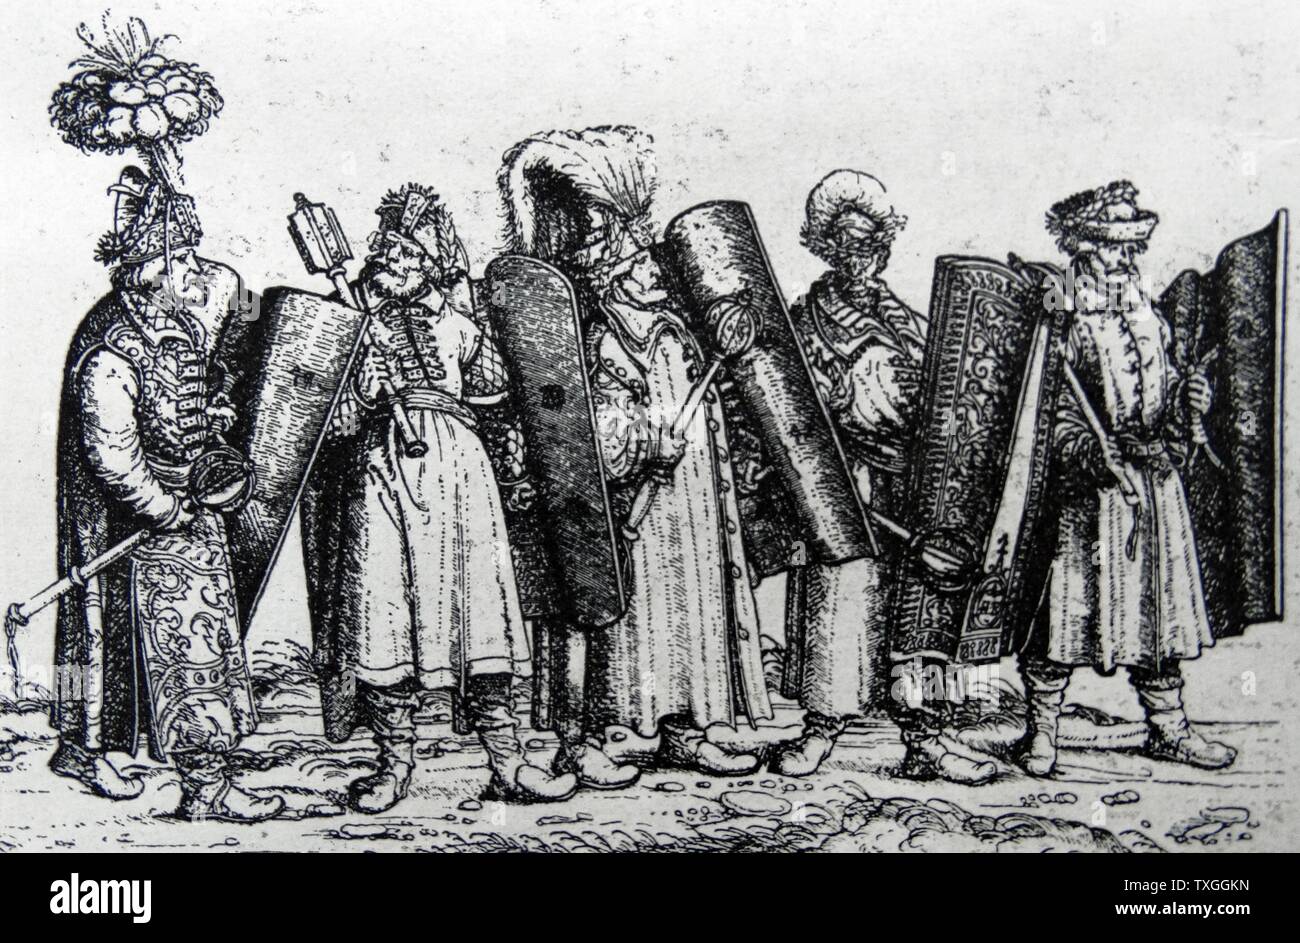 16th Century Hungarian soldiers shown in the outfits of the time. From a wooden engraving in 'The Triumph of King Maximillian I'. Stock Photo